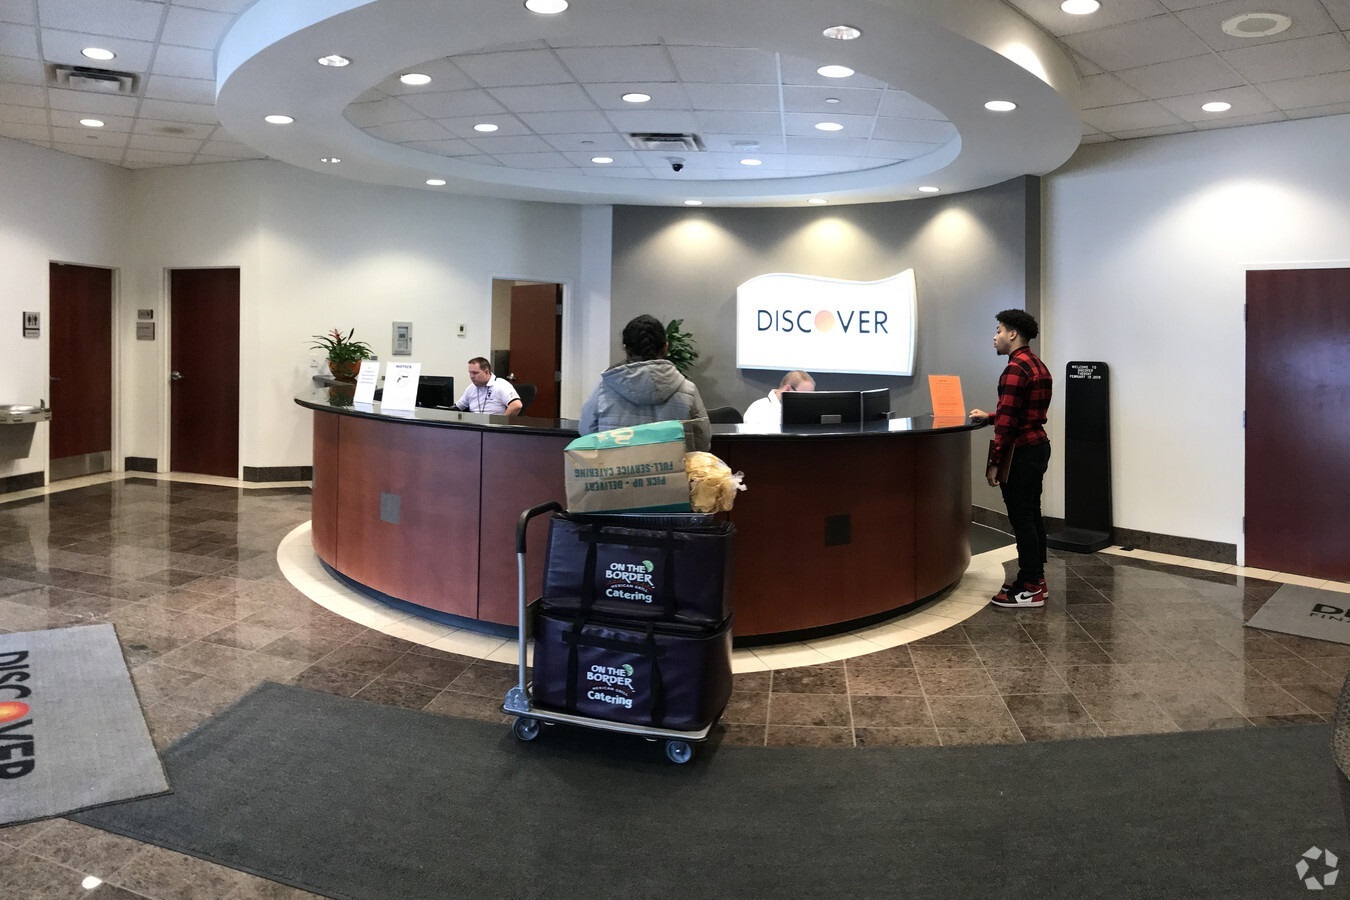 The lobby of the Discover office at 6500 New Albany Road in New Albany, Ohio. (CoStar)